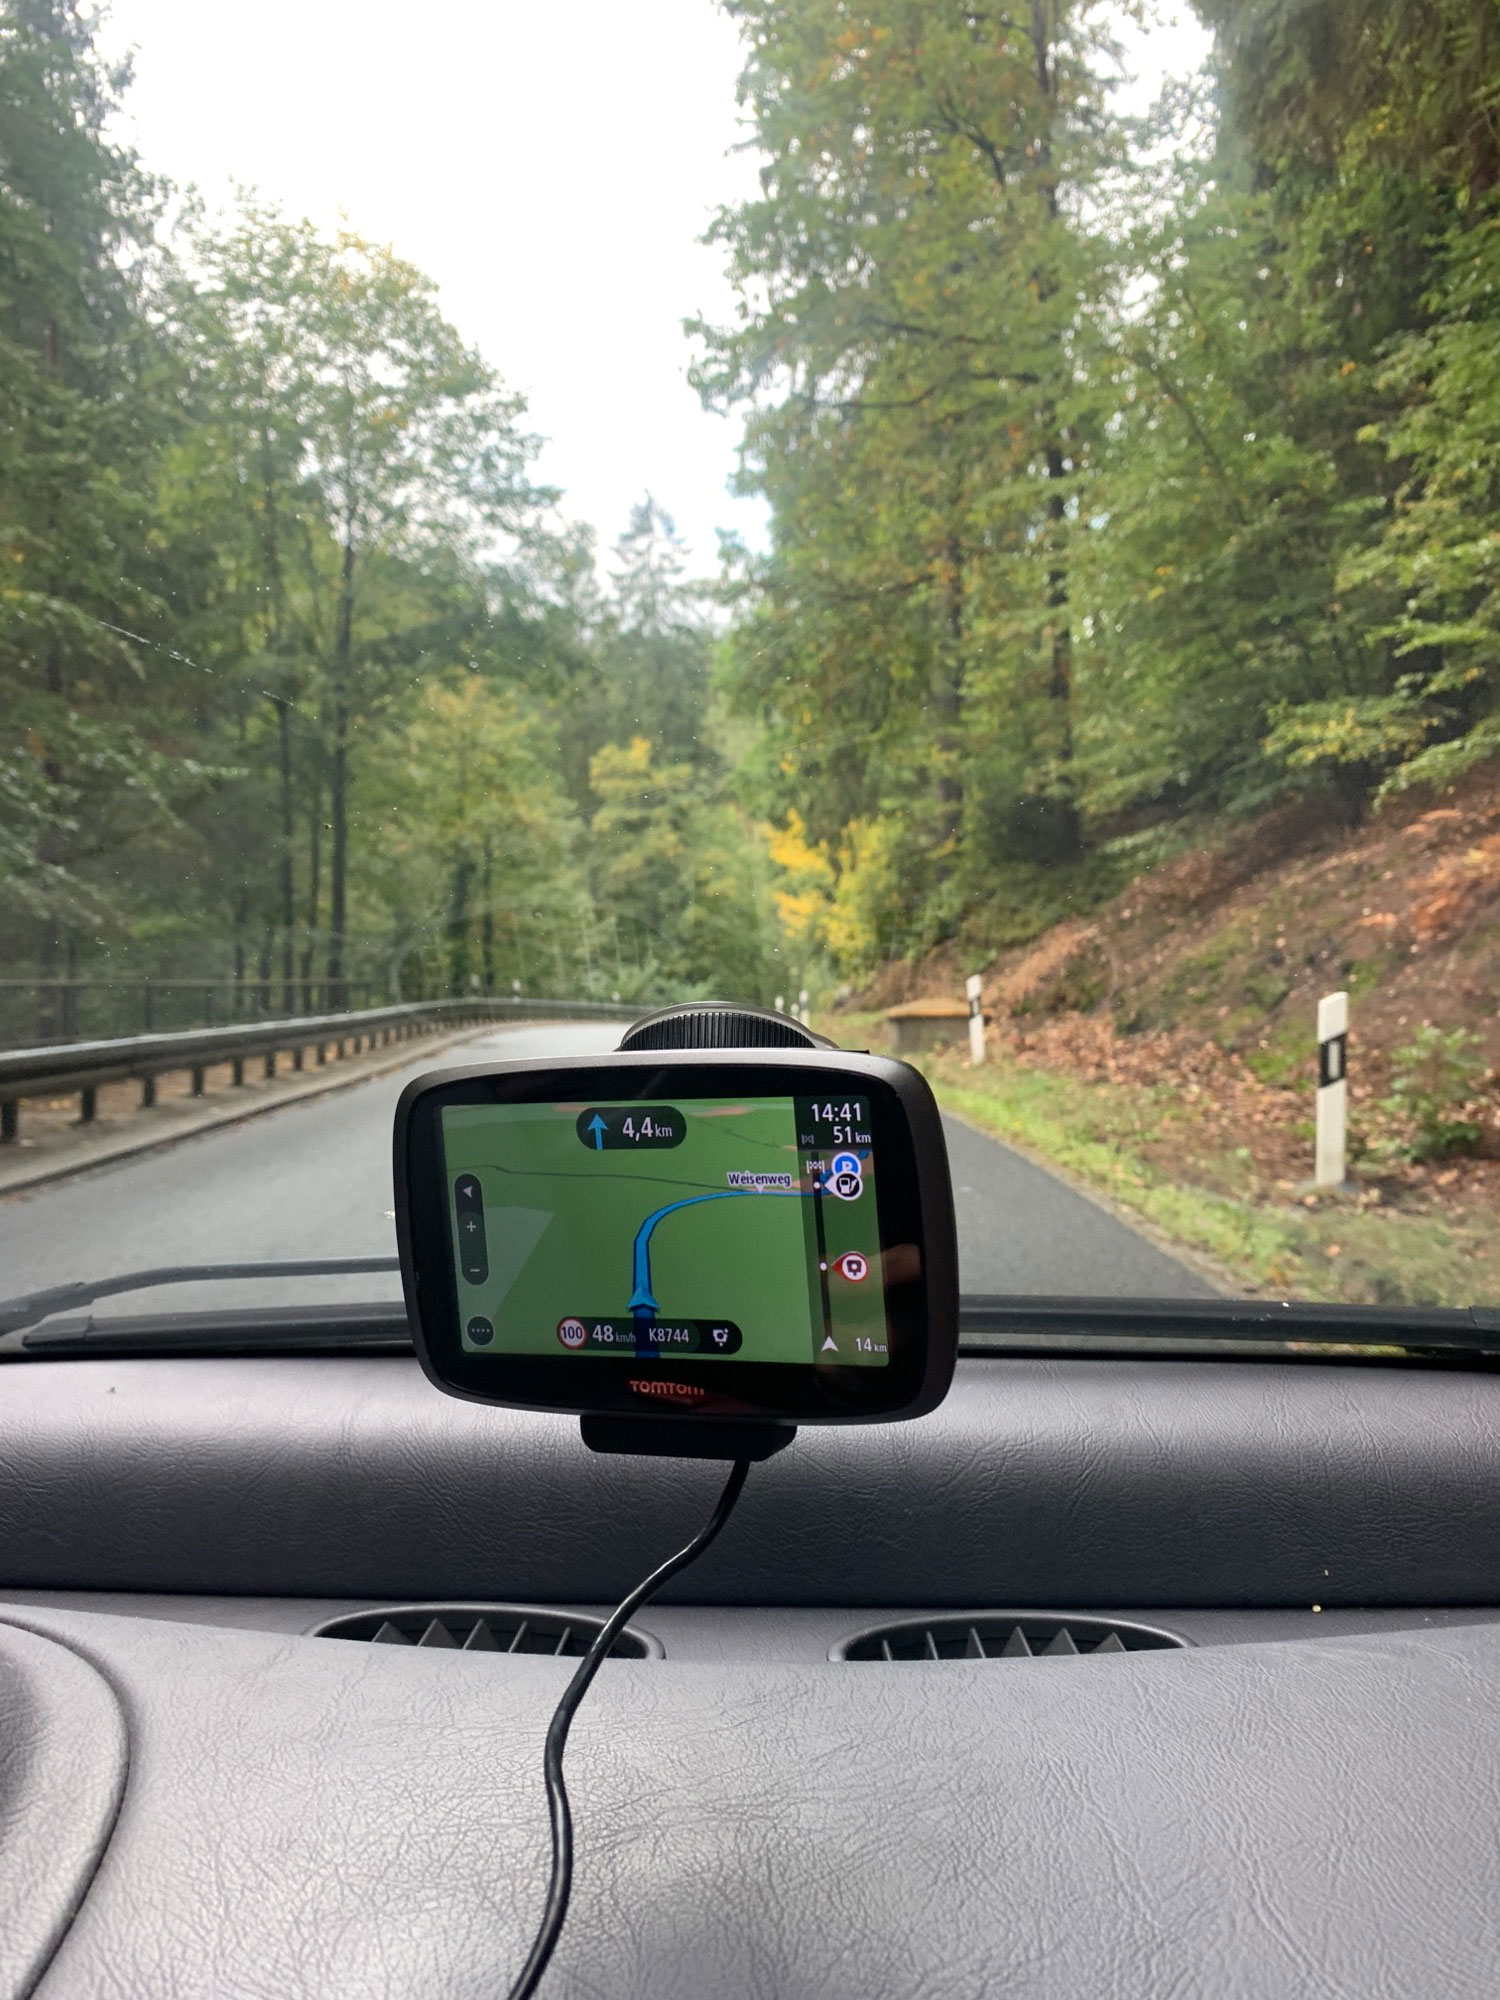 GPS and road curving ahead out the front window of a car in Saxon Switzerland